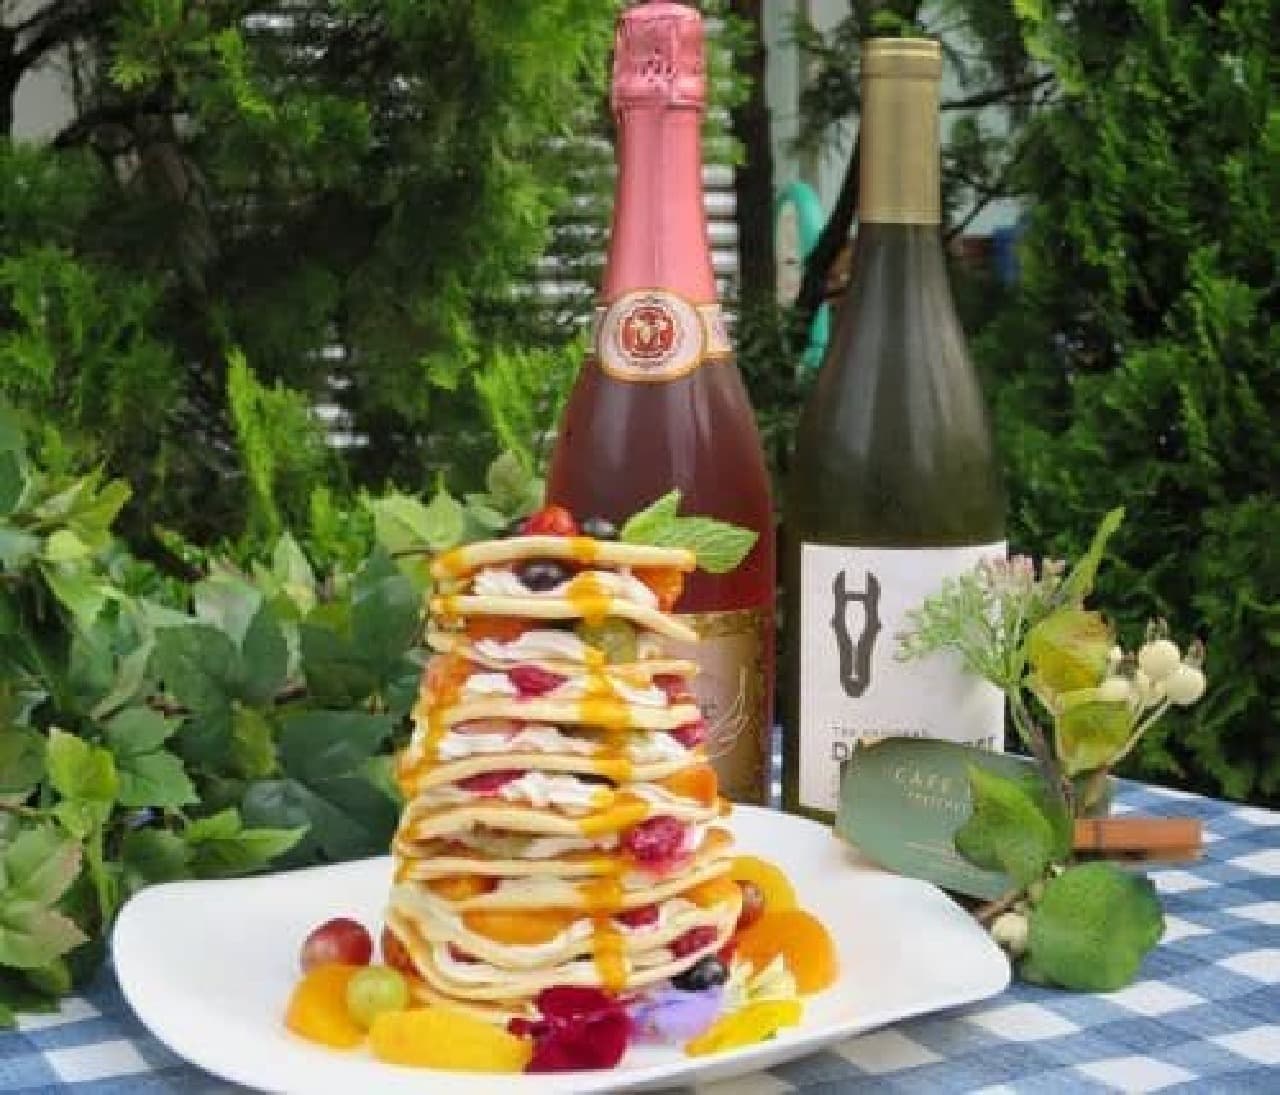 The flower garden is a beer terrace where you can enjoy all-you-can-drink and all-you-can-eat pancakes from 18:00 on weekdays (17:00 on holidays).